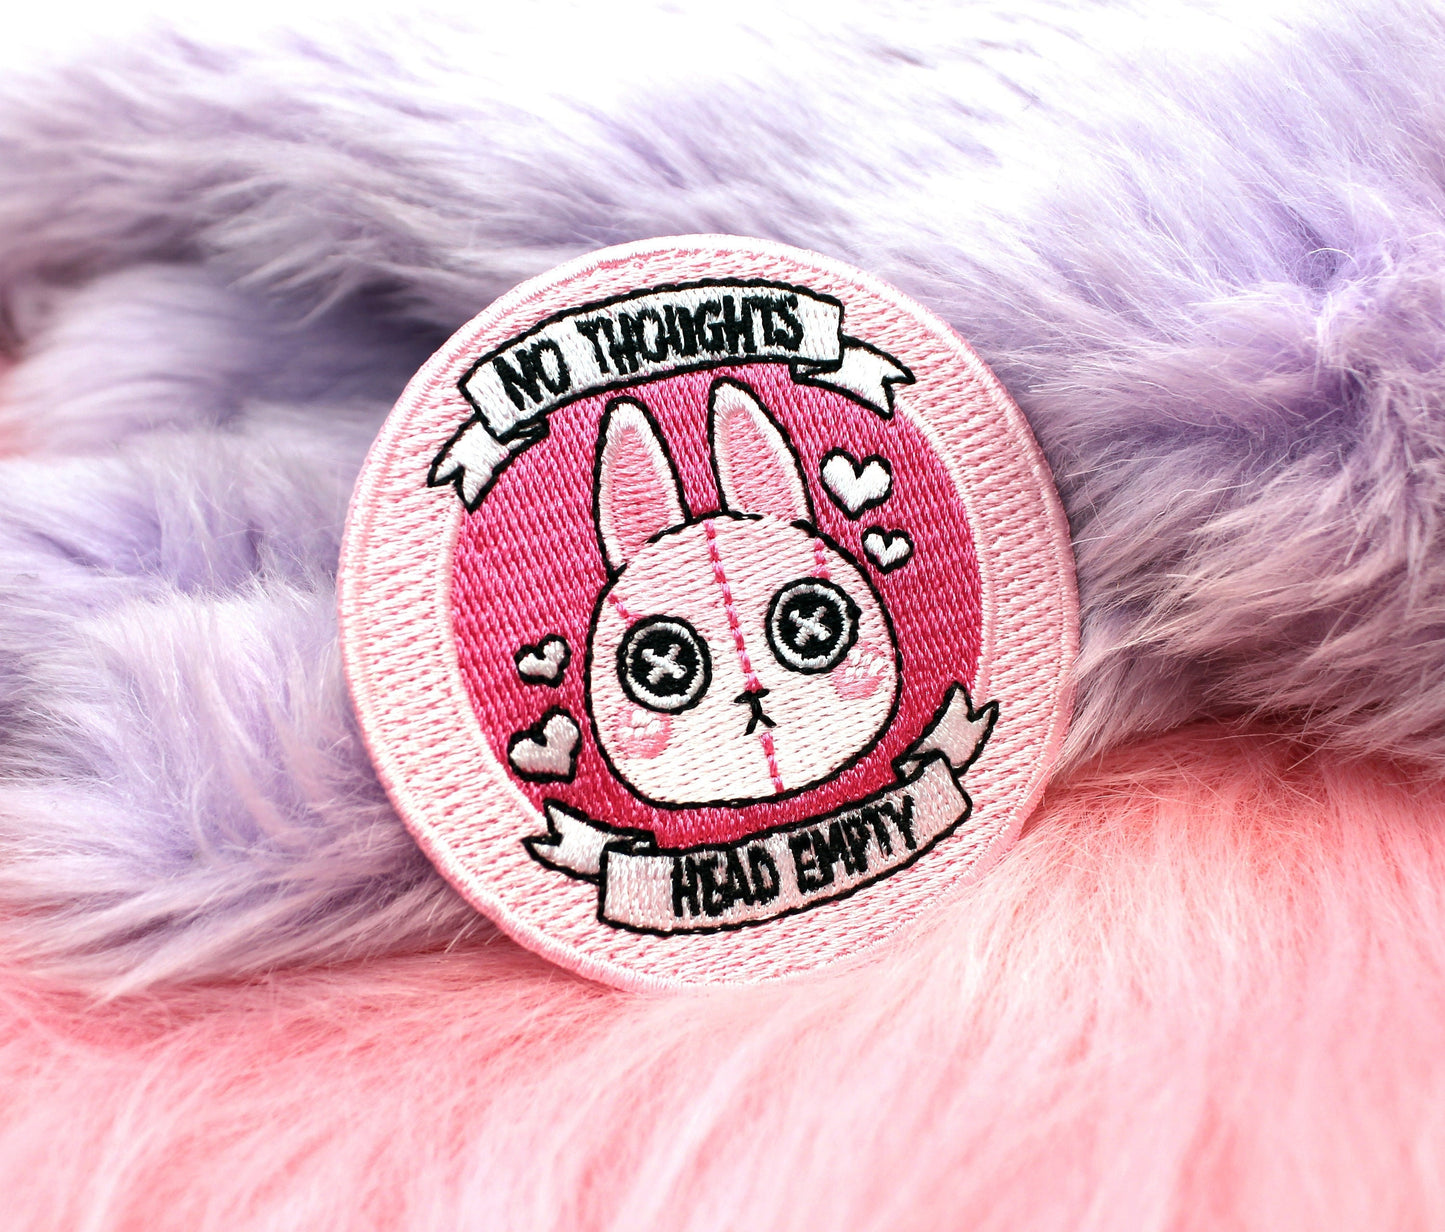 No Thoughts Head Empty Iron-On Patch (60mm) - bunny rabbit embroidered patch